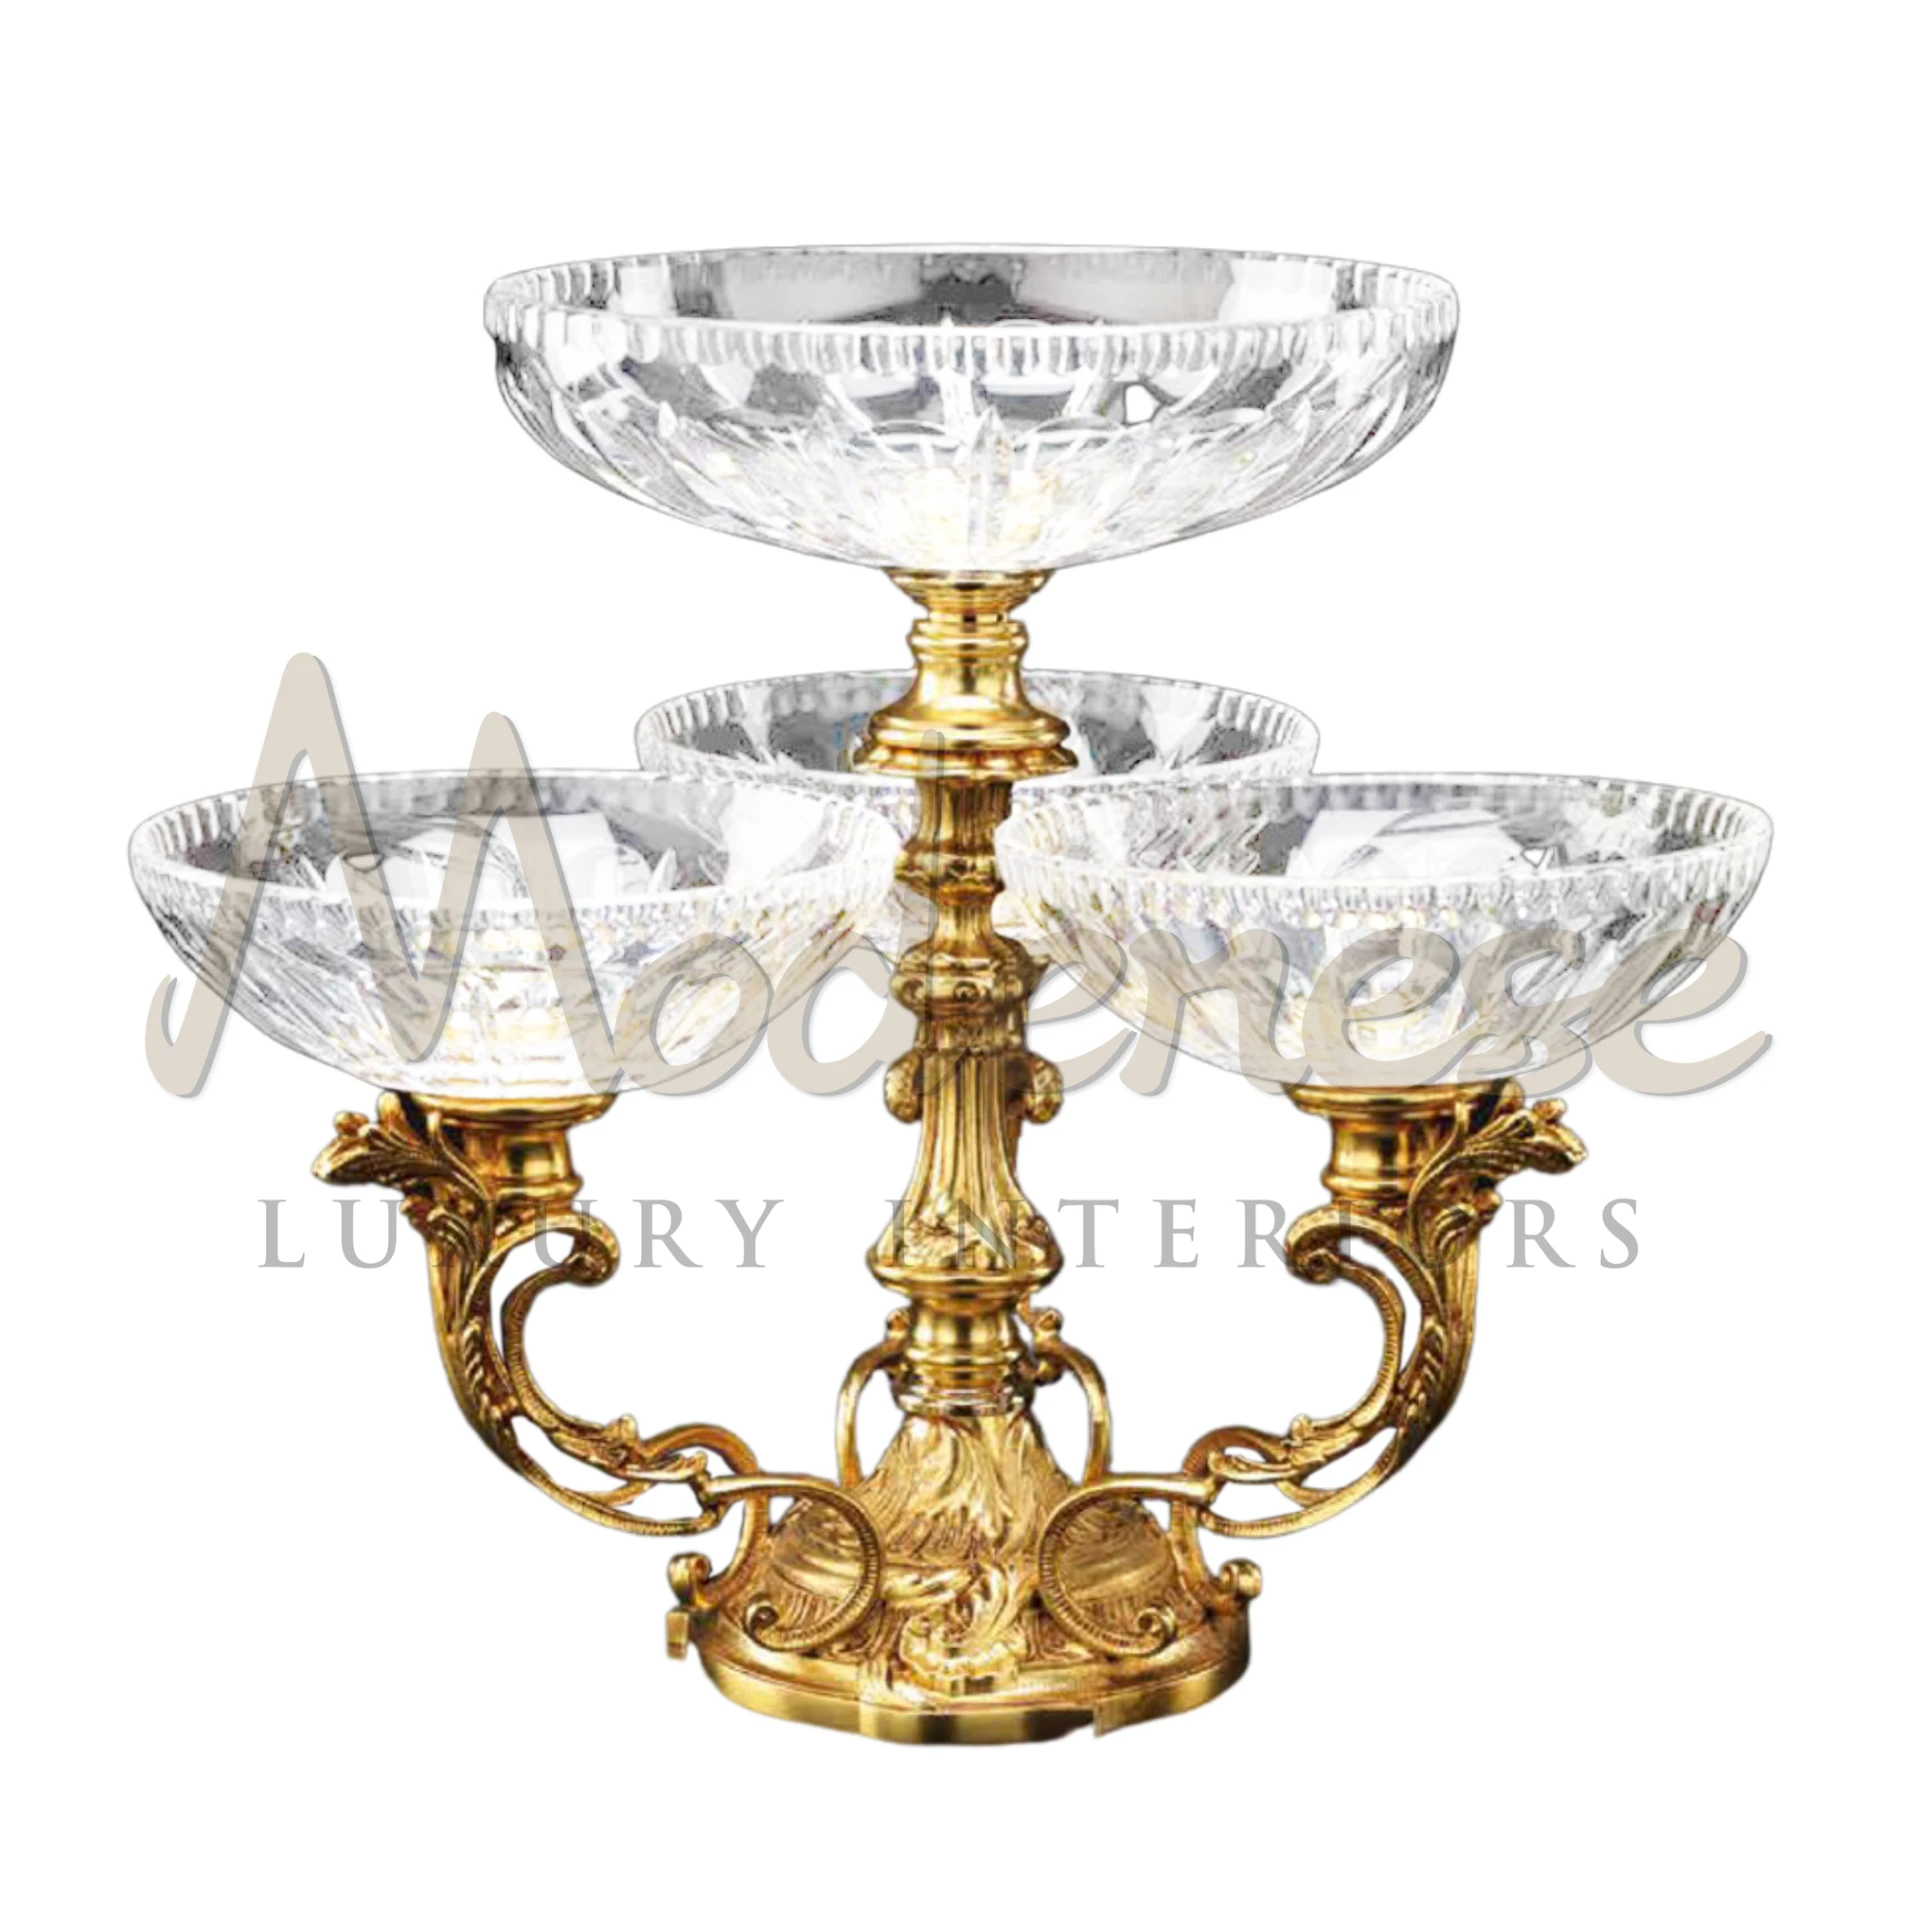 Classical Four Deck Bowl in crystal, glass, or porcelain, featuring intricate, multi-layered design for a luxurious, classic, and baroque interior style.